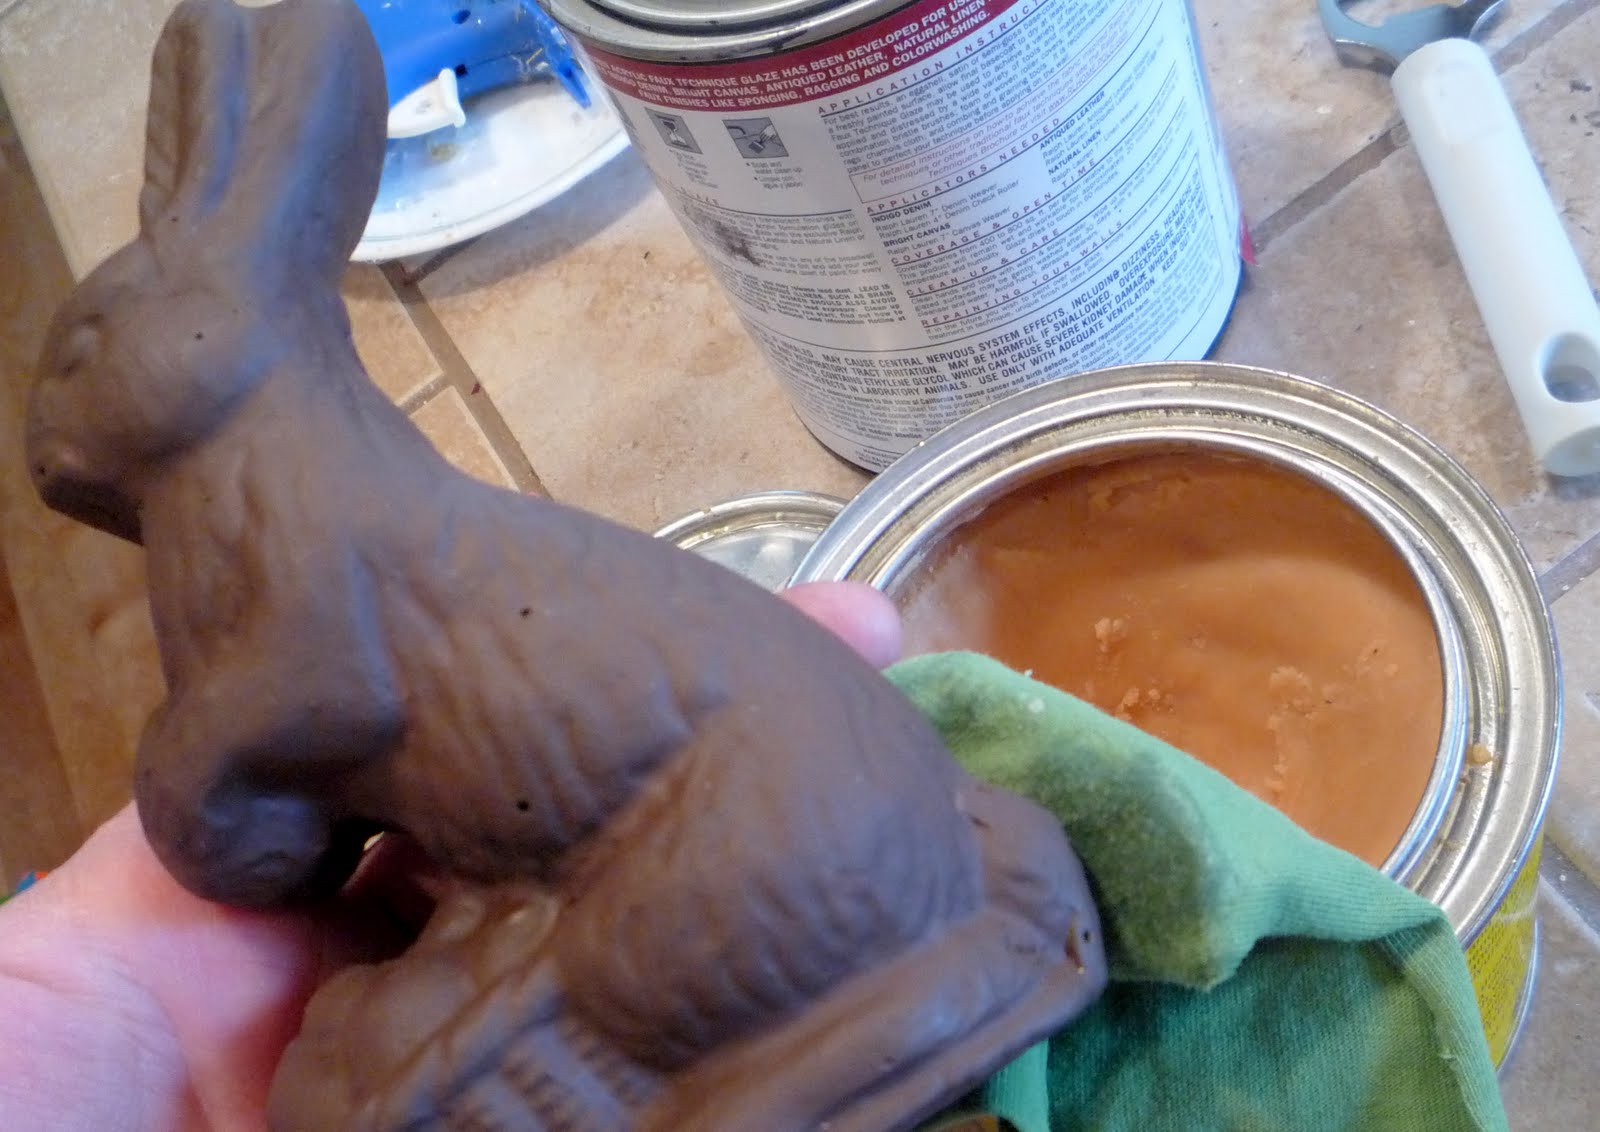 Crafty Sisters: Chocolate Mold Easter Bunnies Using Sculptamold